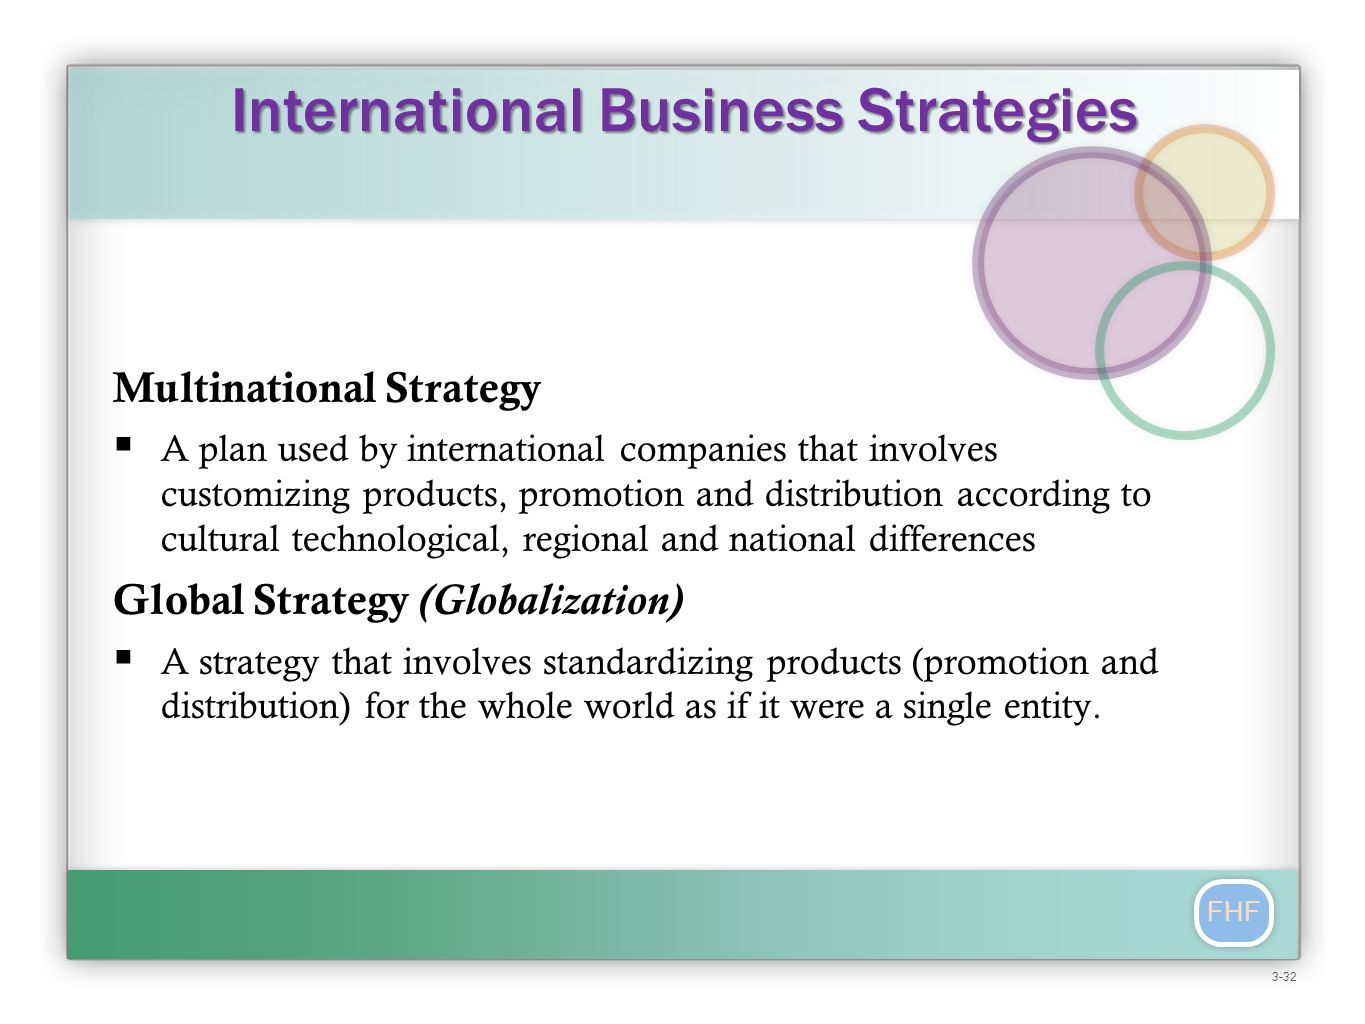 FHF Multinational Strategy  A plan used by international companies that involves customizing products, promotion and distribution according to cultural technological, regional and national differences Global Strategy (Globalization)  A strategy that involves standardizing products (promotion and distribution) for the whole world as if it were a single entity.